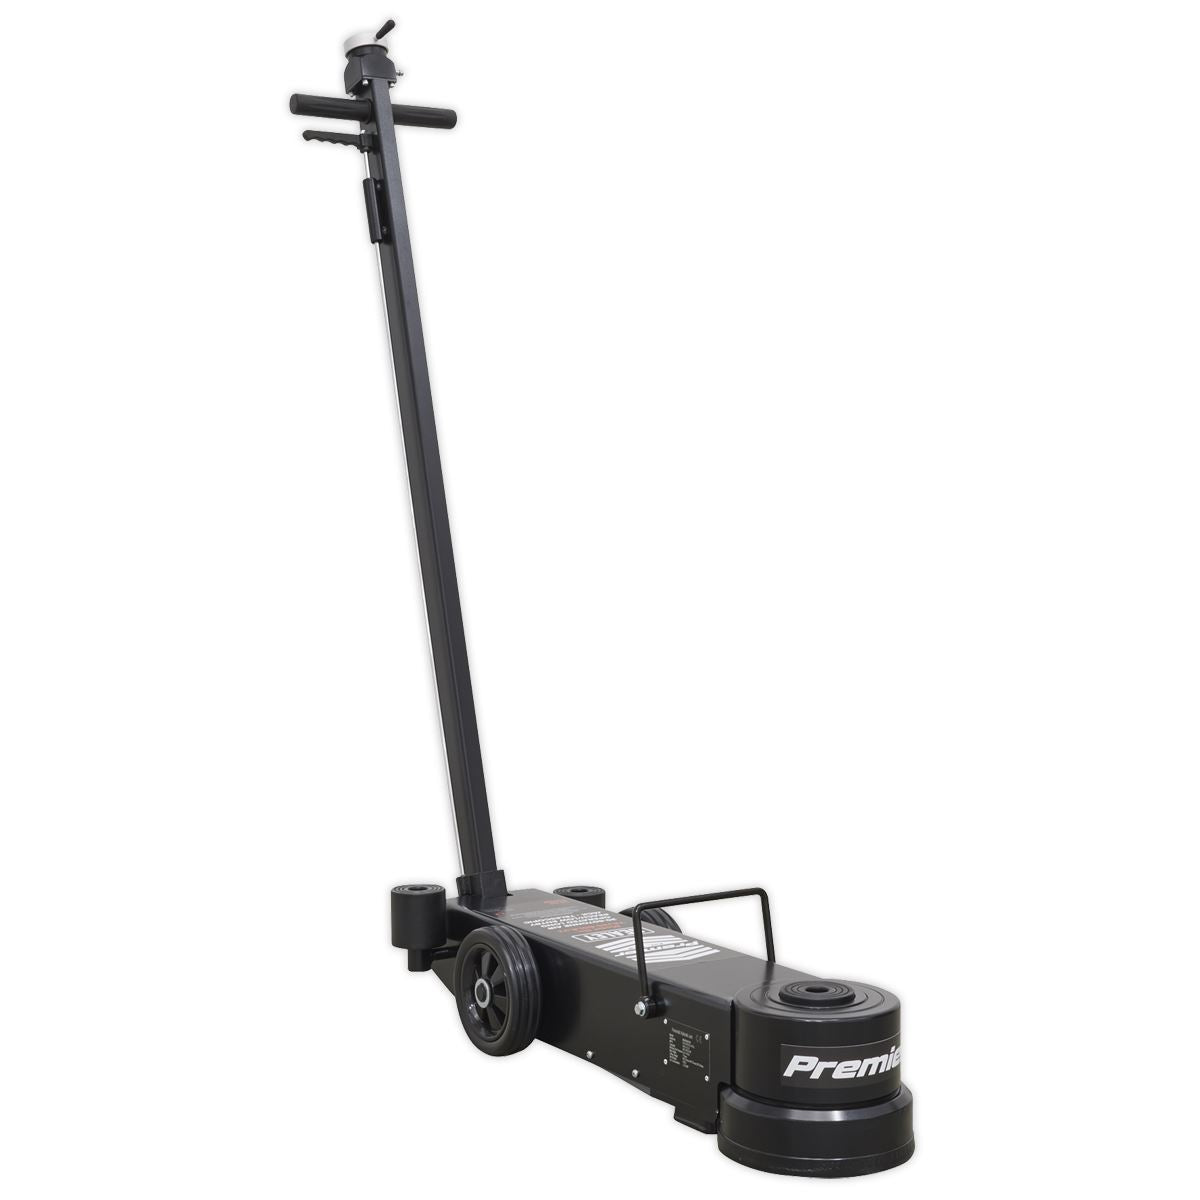 Sealey Long Reach/Low Profile Air Operated Telescopic Jack 20-60 Tonne